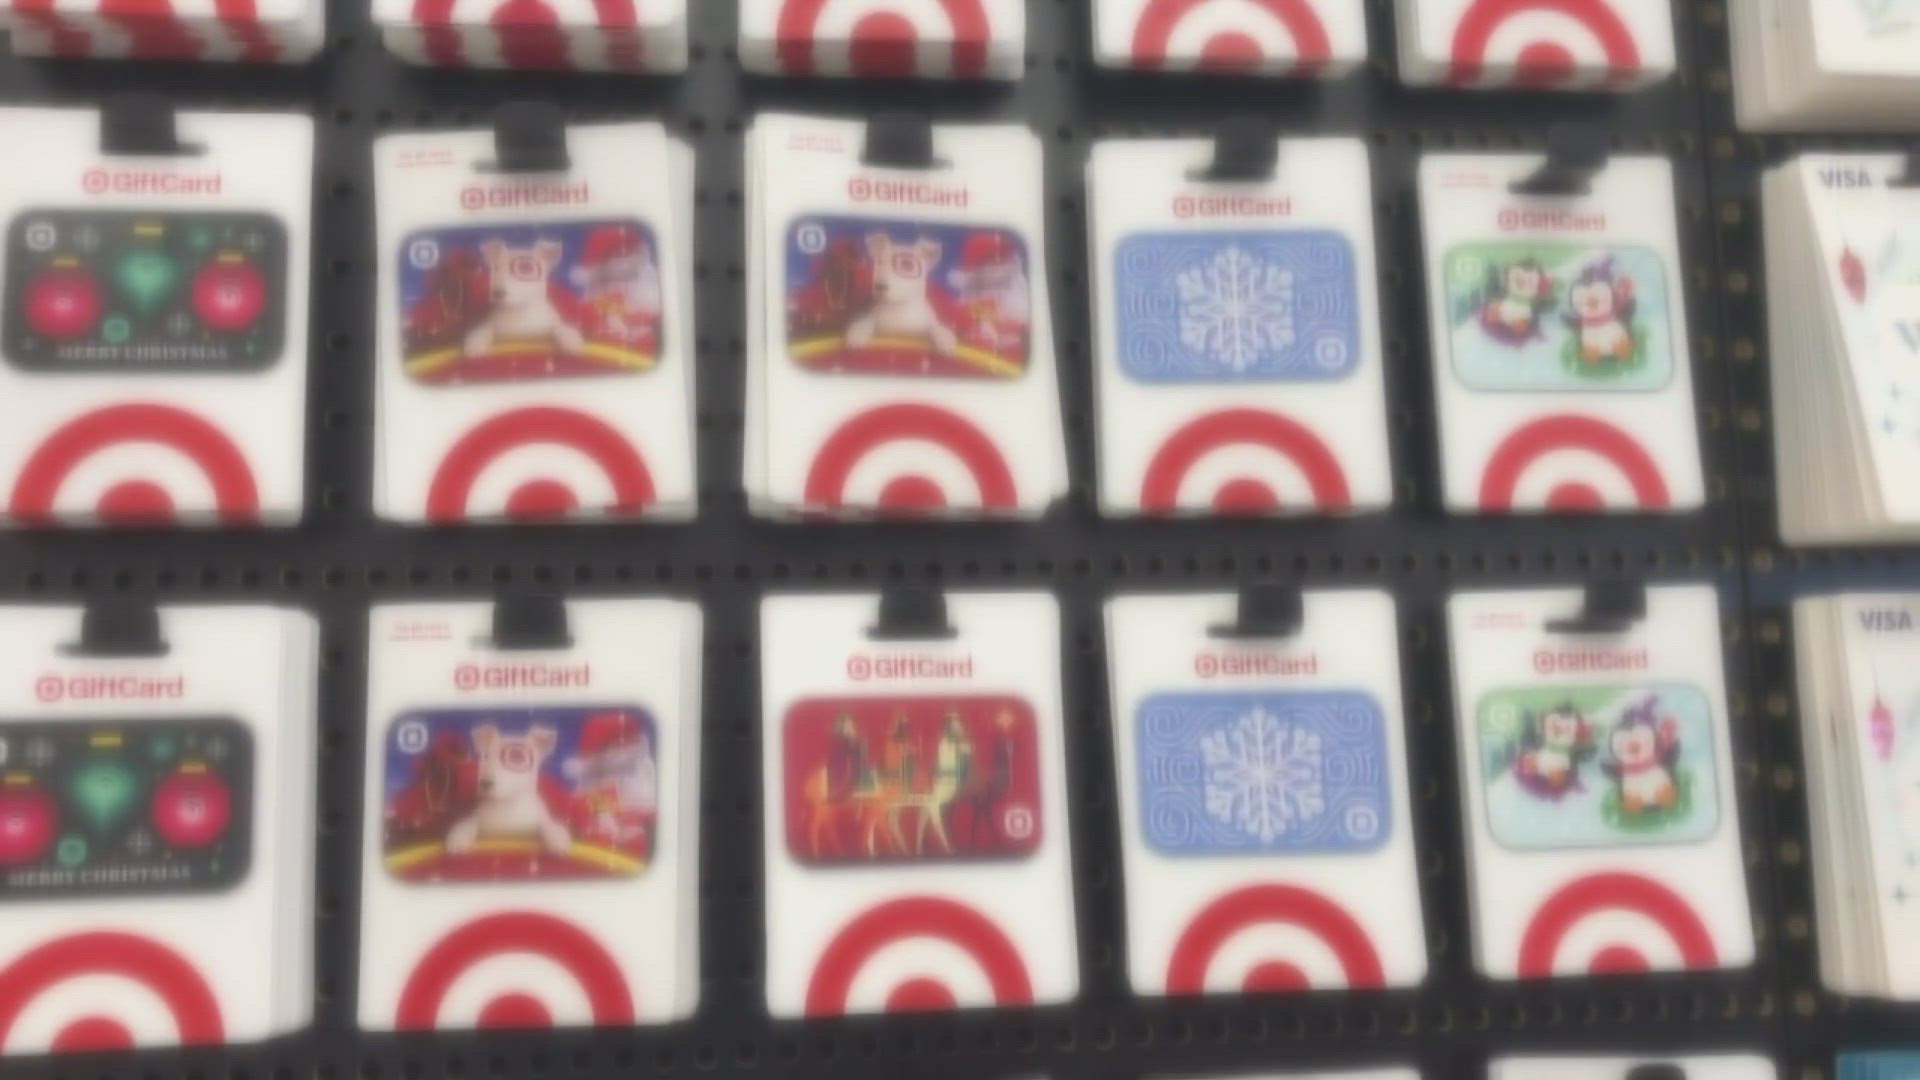 Google Play Store Gift Cards Already Available and on Display at Some  Target Stores